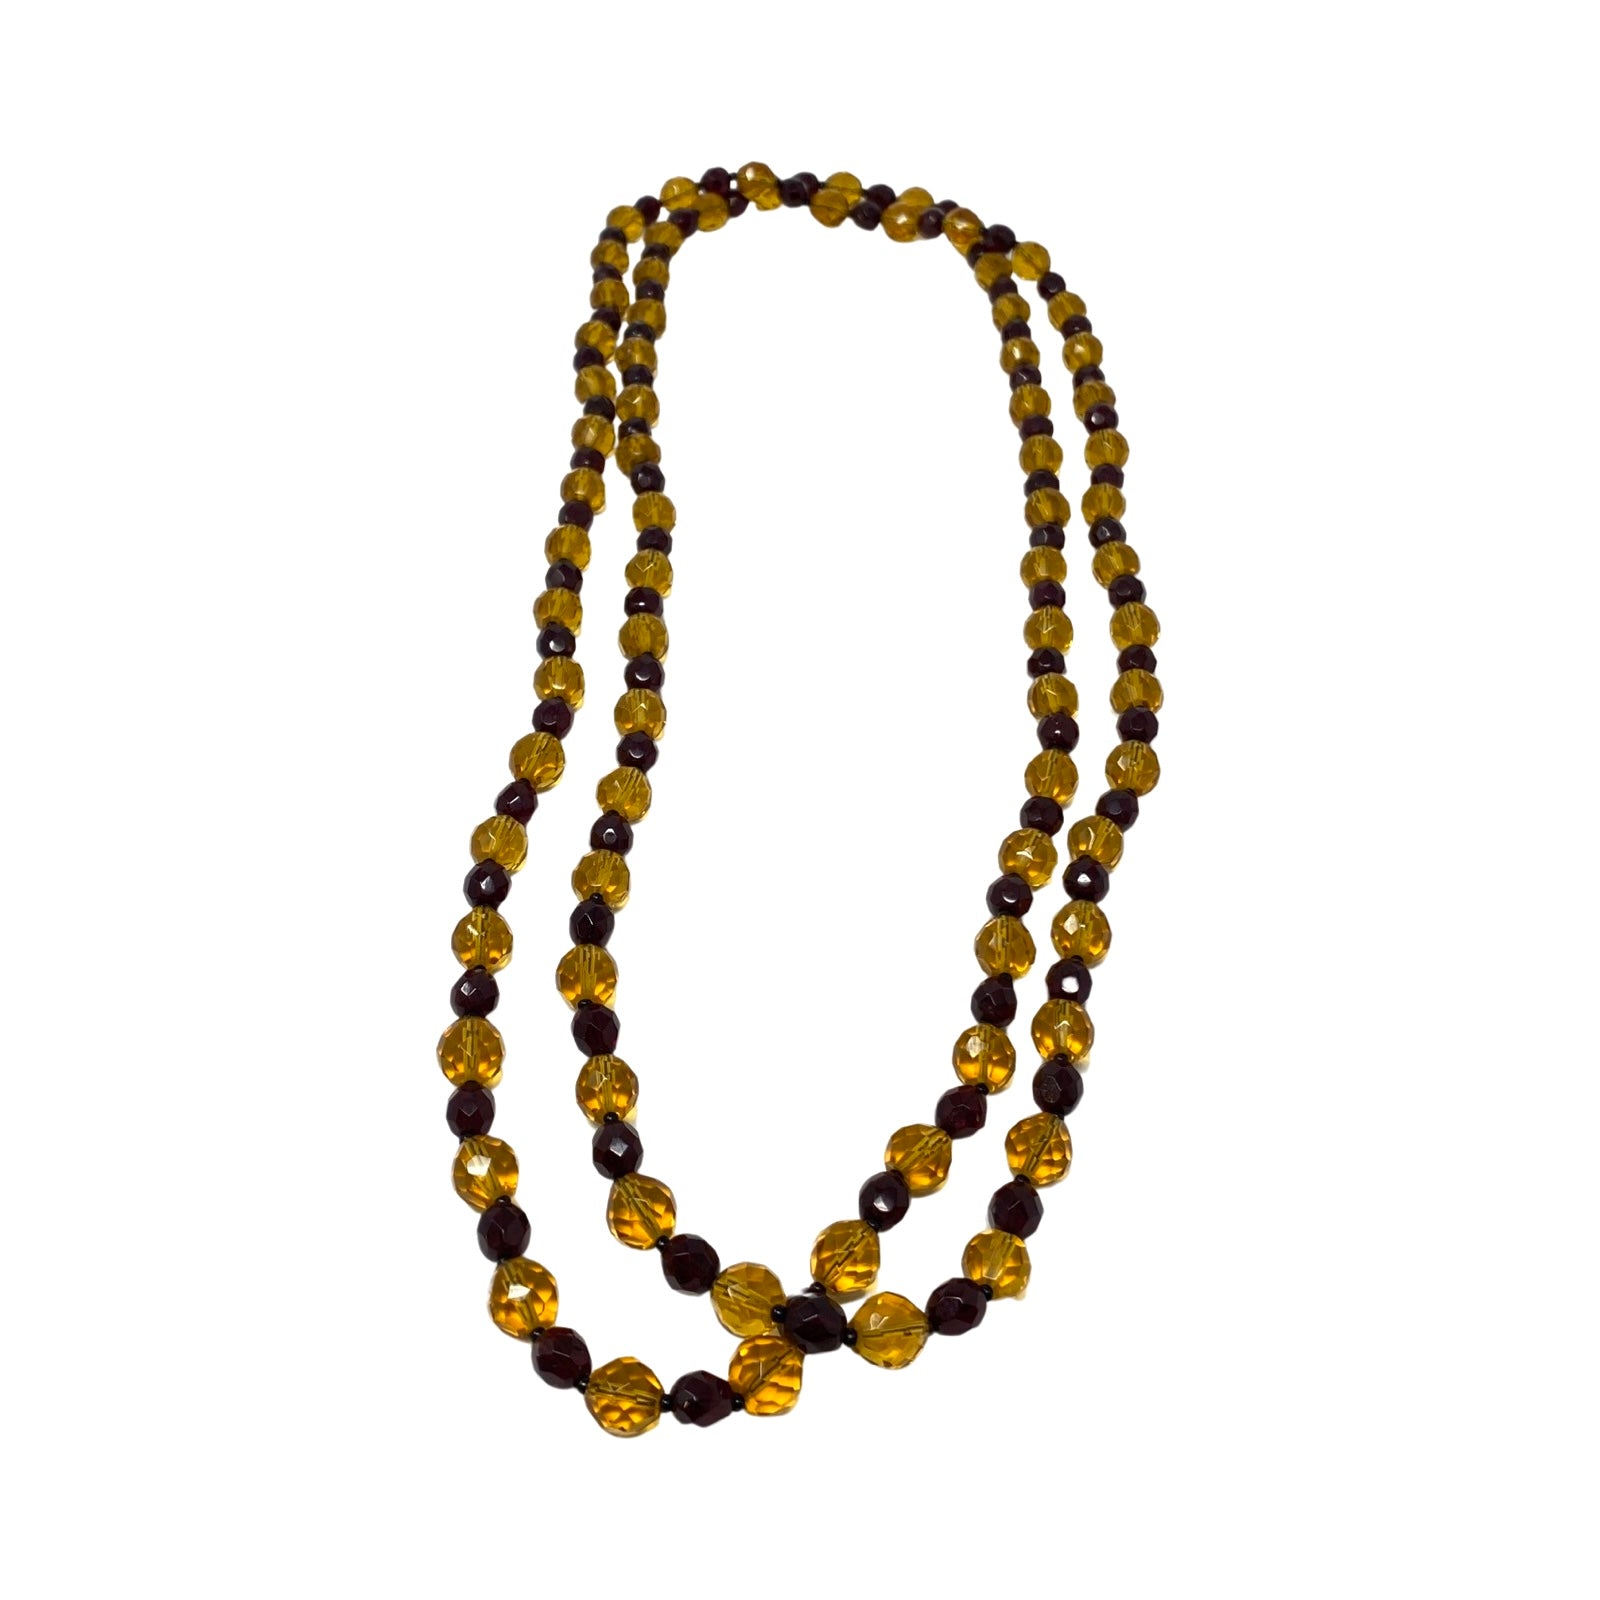 Double Wrap Faceted Bead Necklace